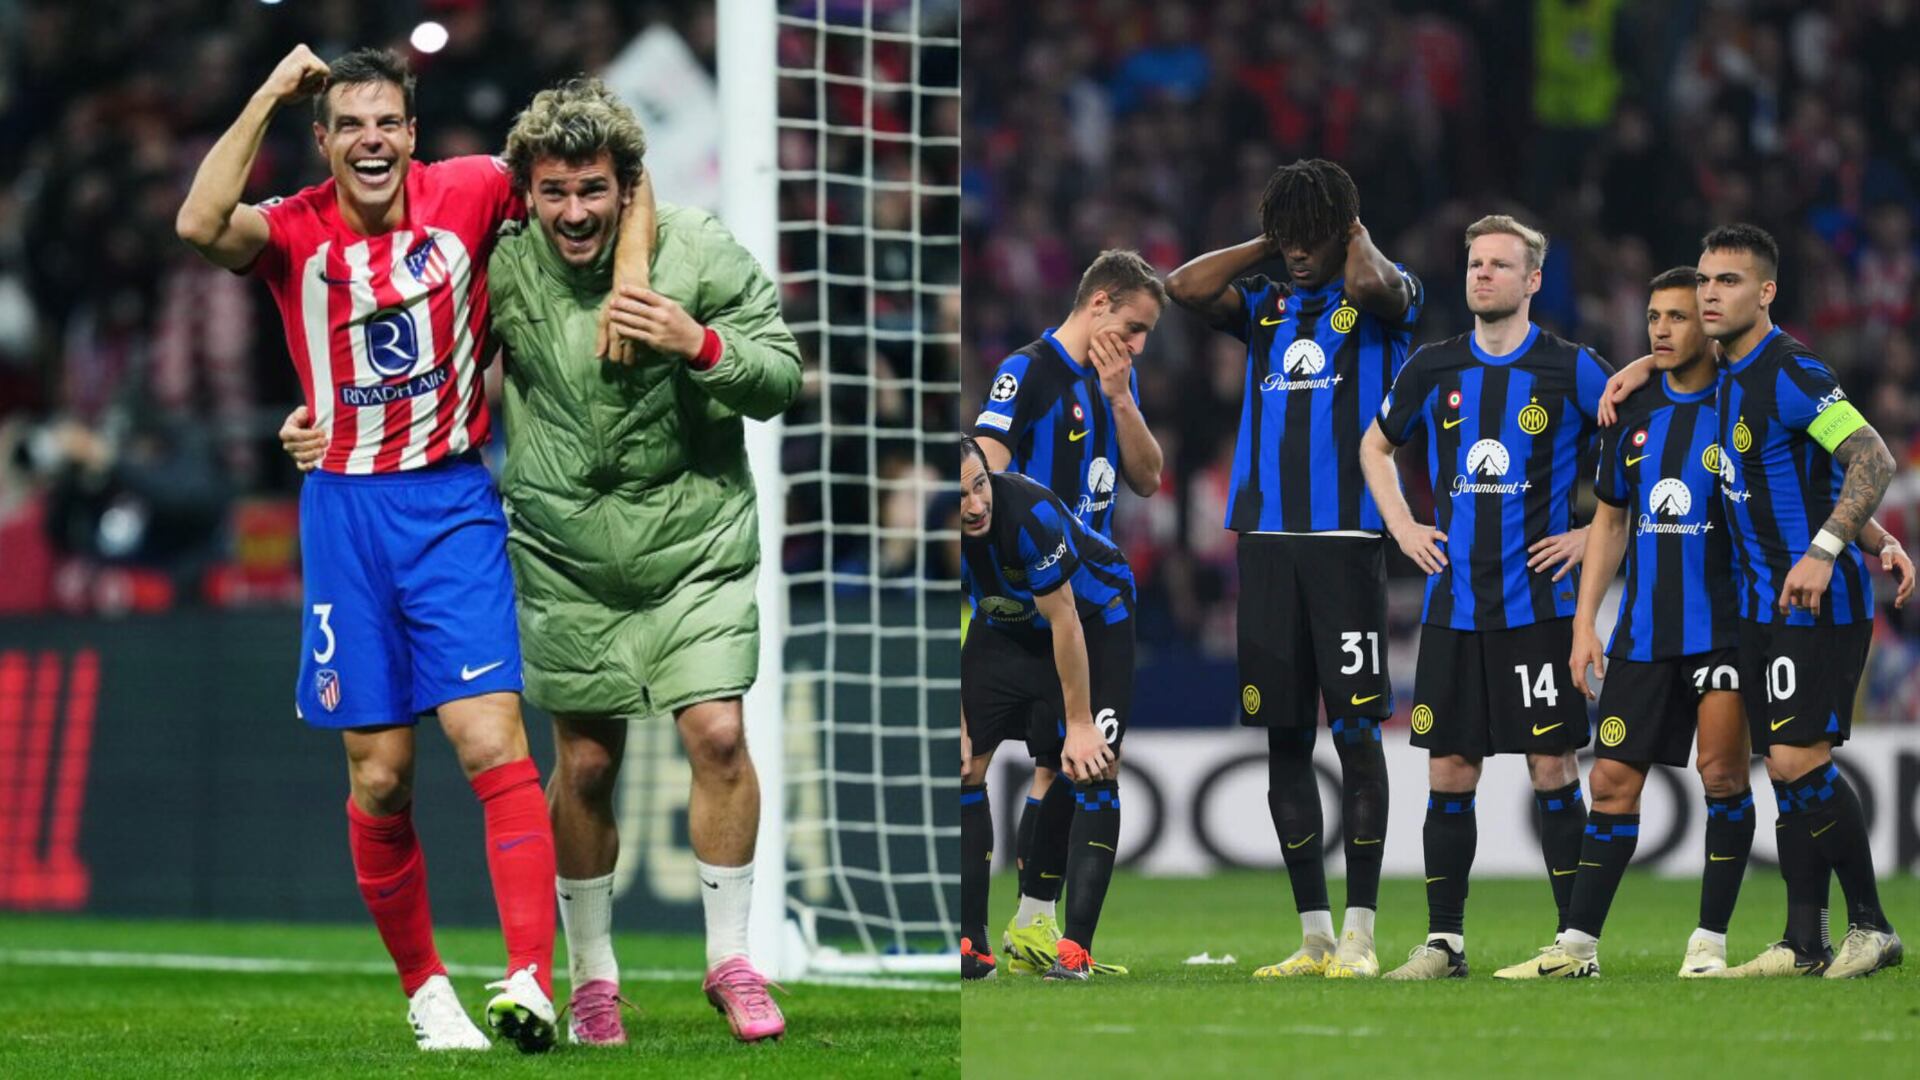 As Atletico eliminates Inter, Griezmann insults this player with these words